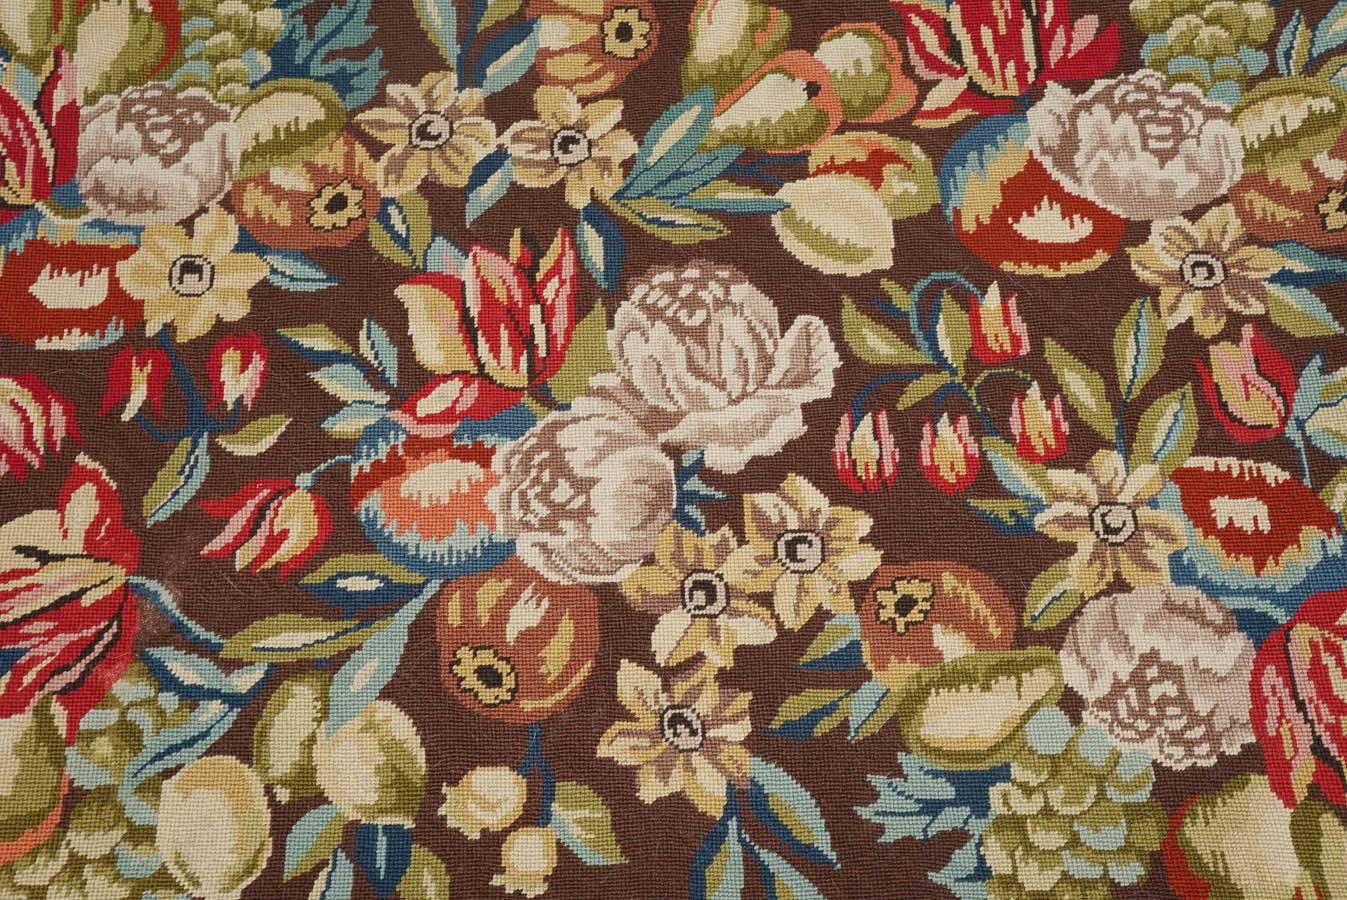 Lovely floral arrangement on this colorful wall hanging. Handmade, lined, and. mounted. Excellent condition and deep, rich colors. 